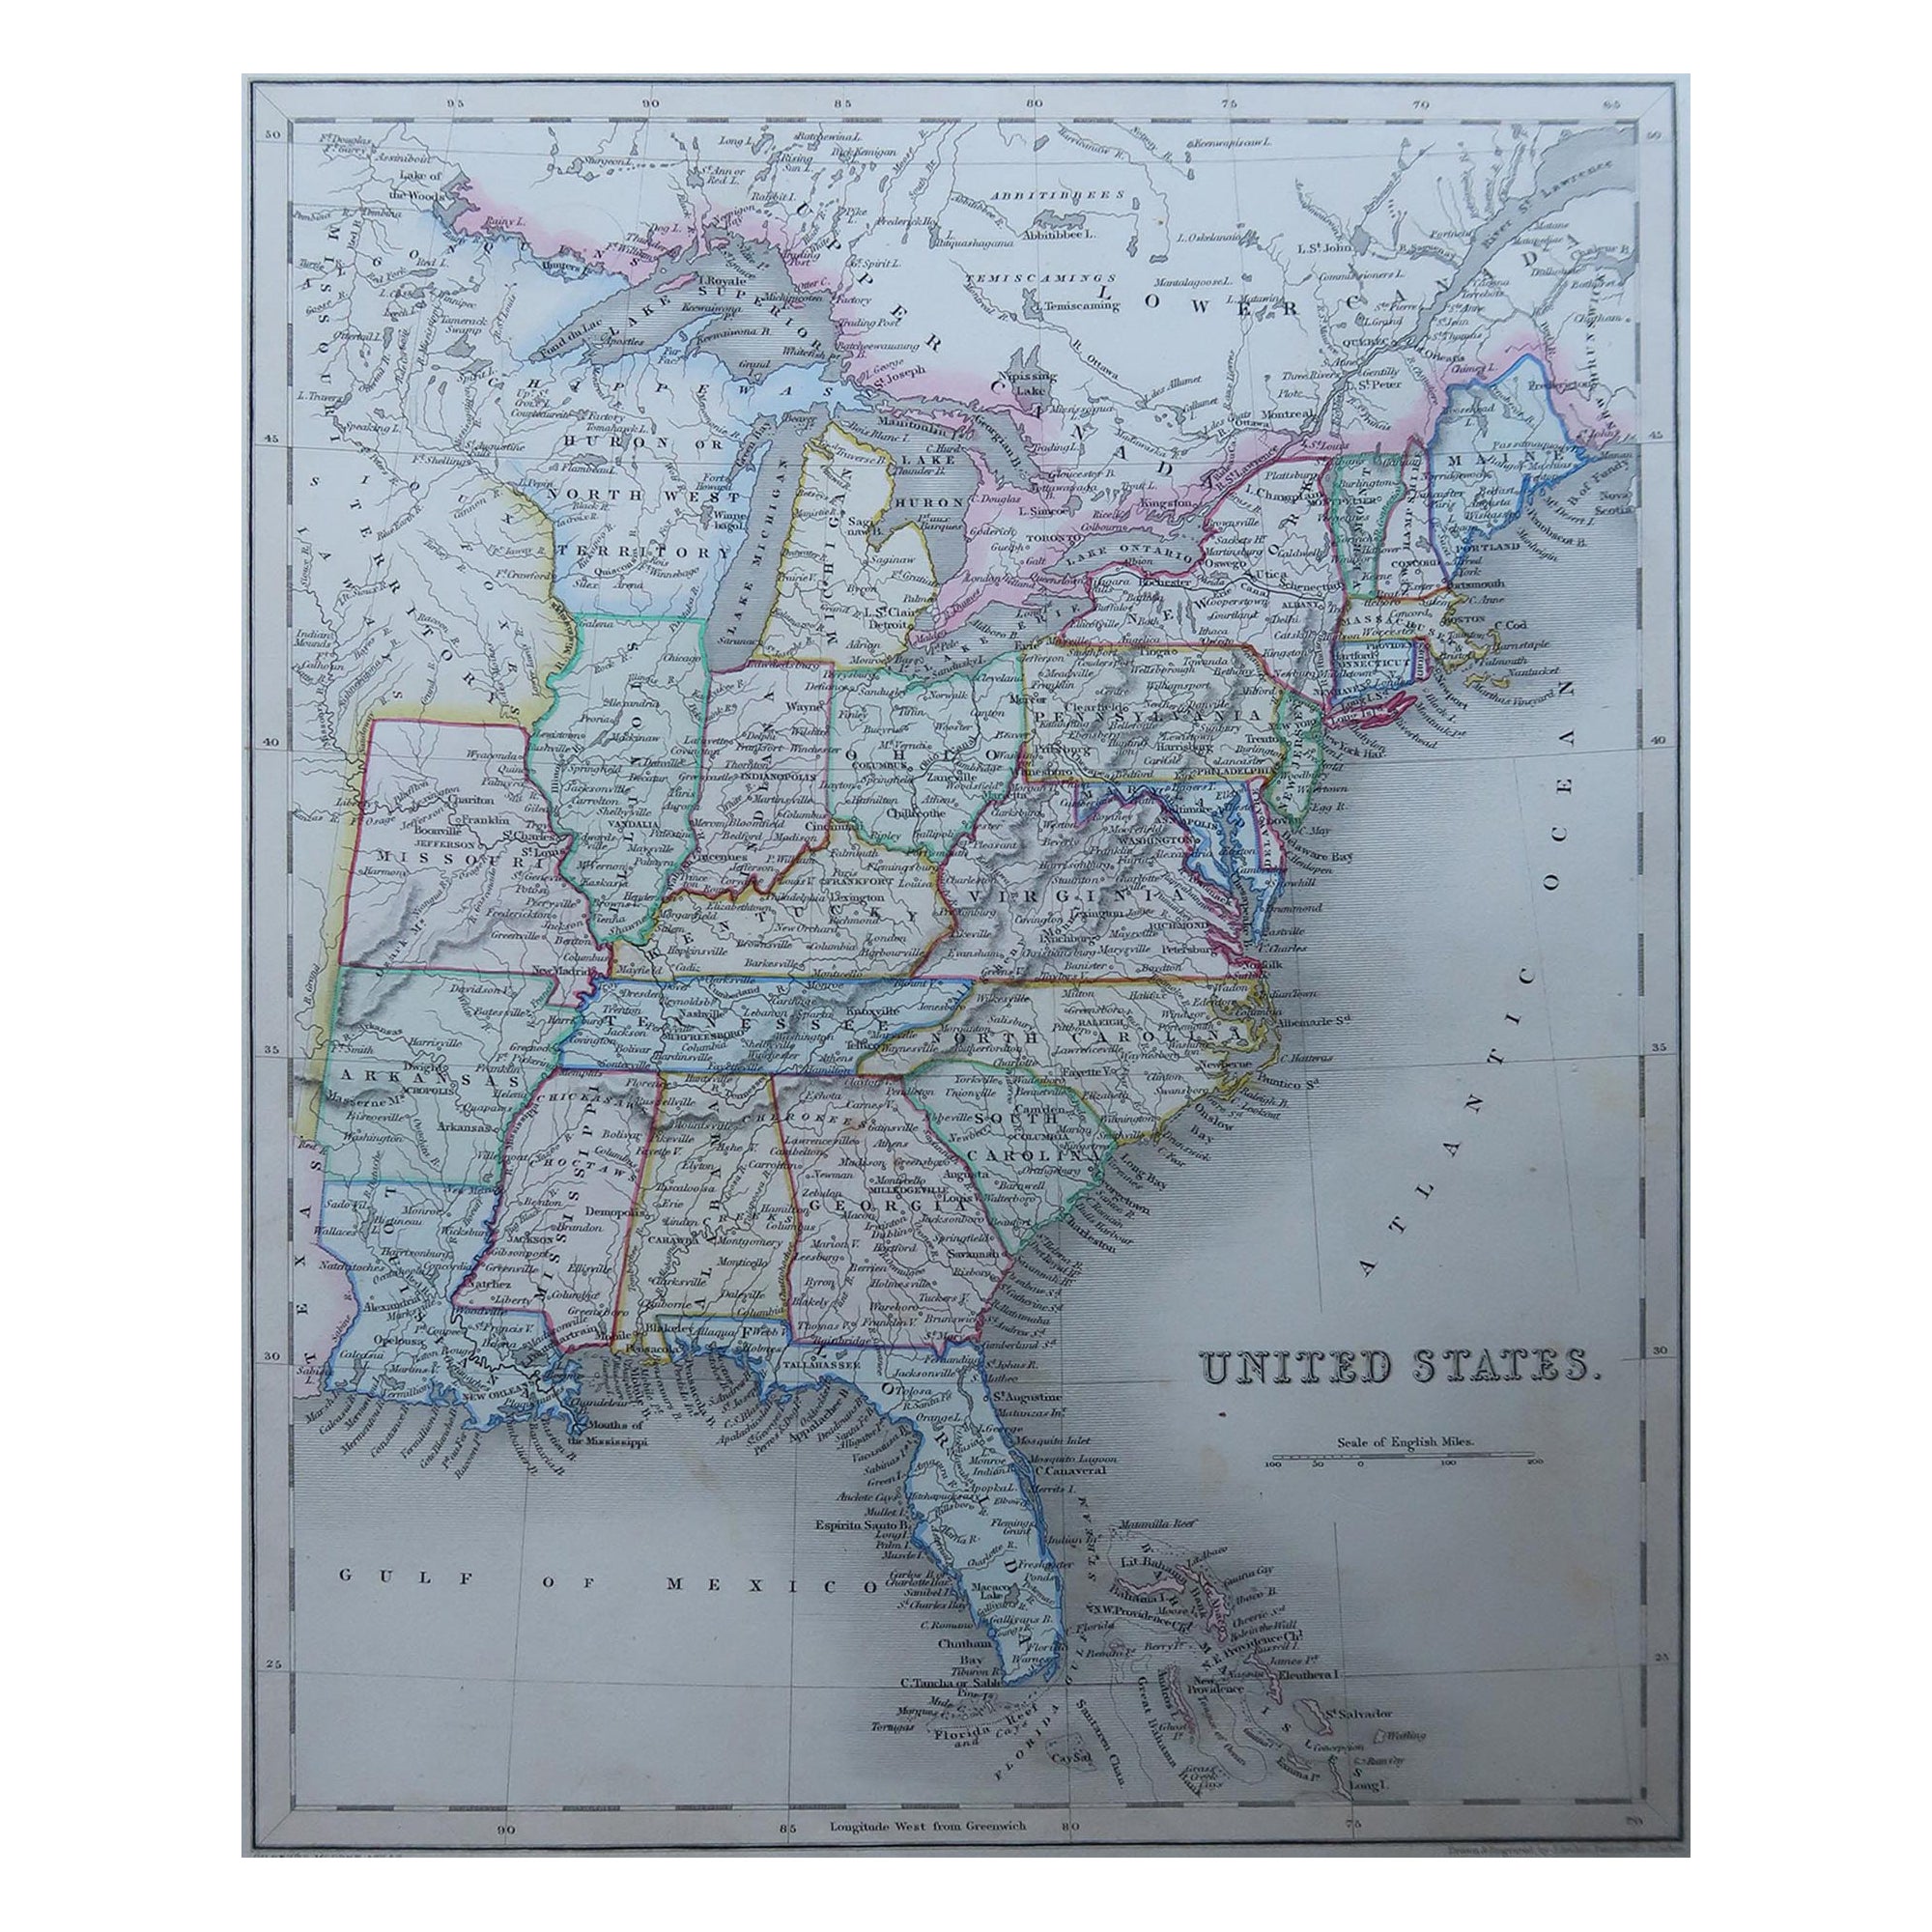 Original Antique Map of United States, Grattan and Gilbert, 1843